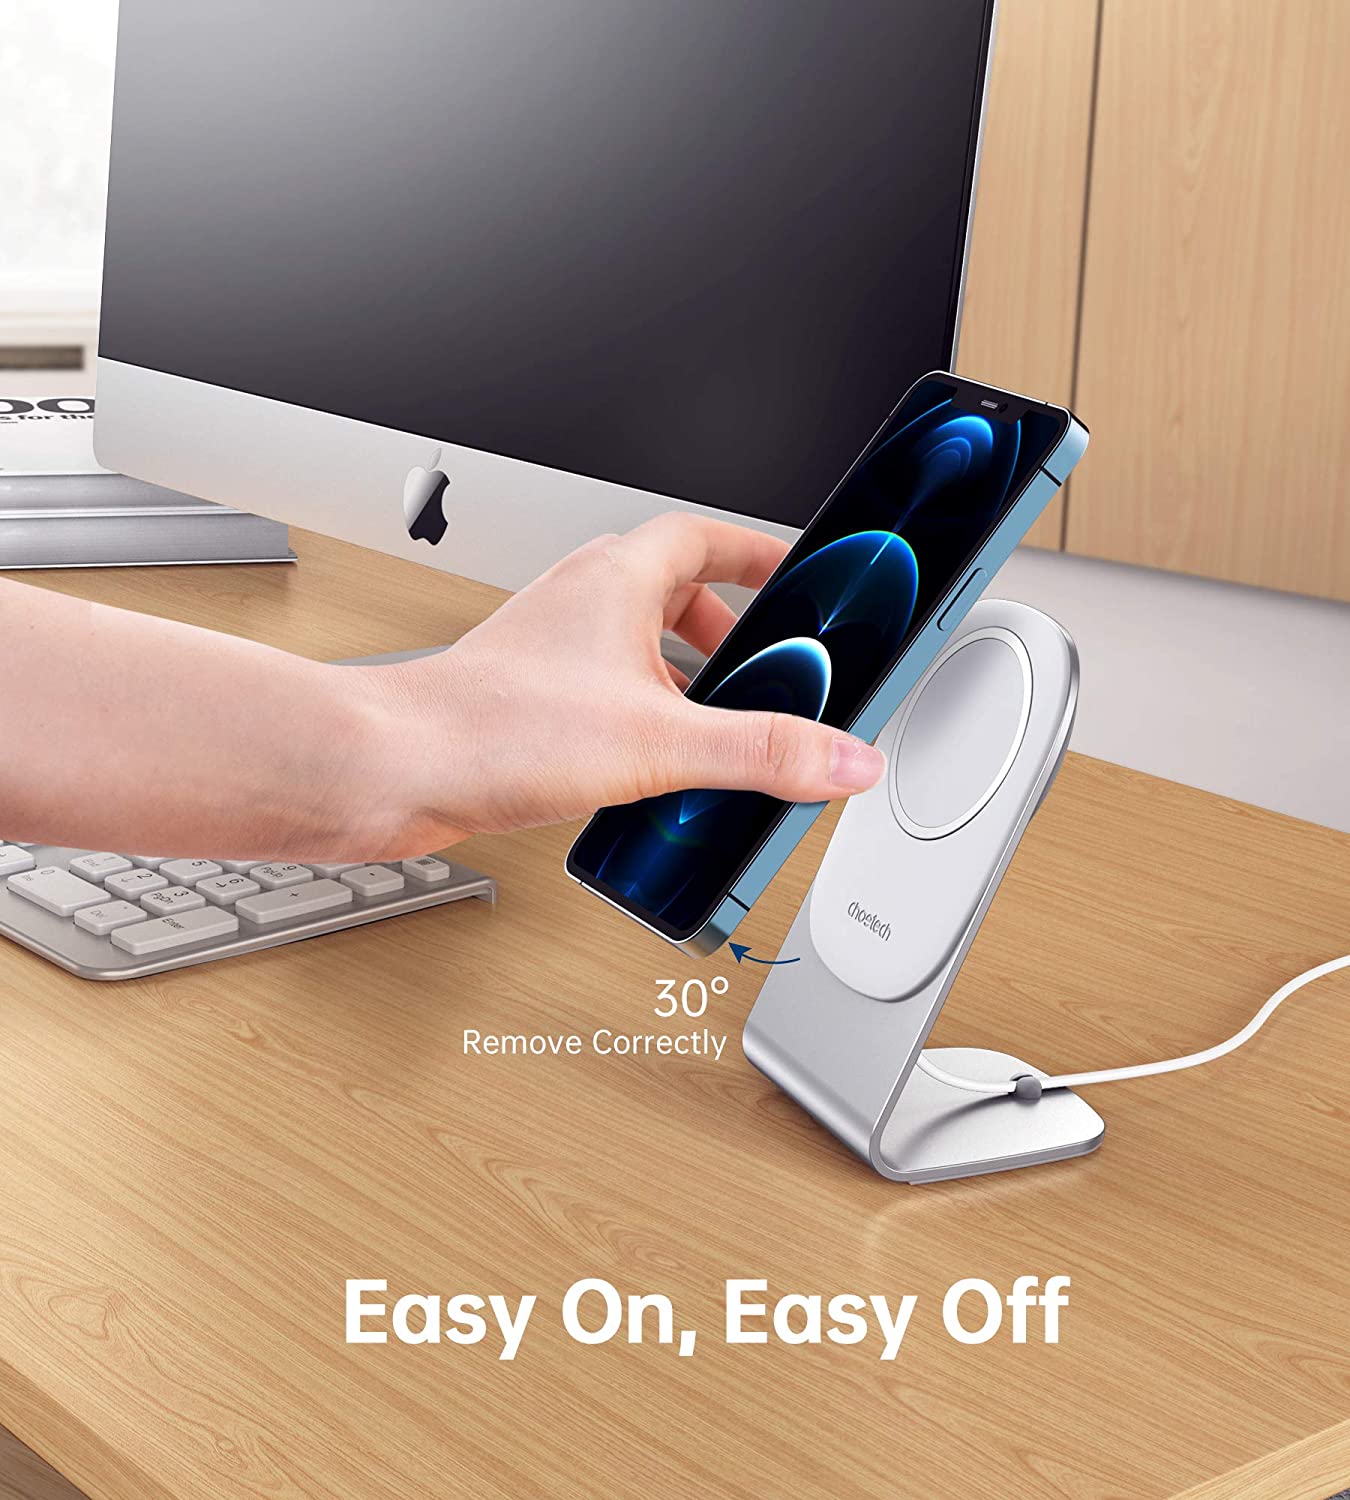 H046 Choetech Phone Stand for MagSafe Charger Aluminum iPhone 12 Magnetic Charging Dock Holder Cradle for Desk CHOETECH